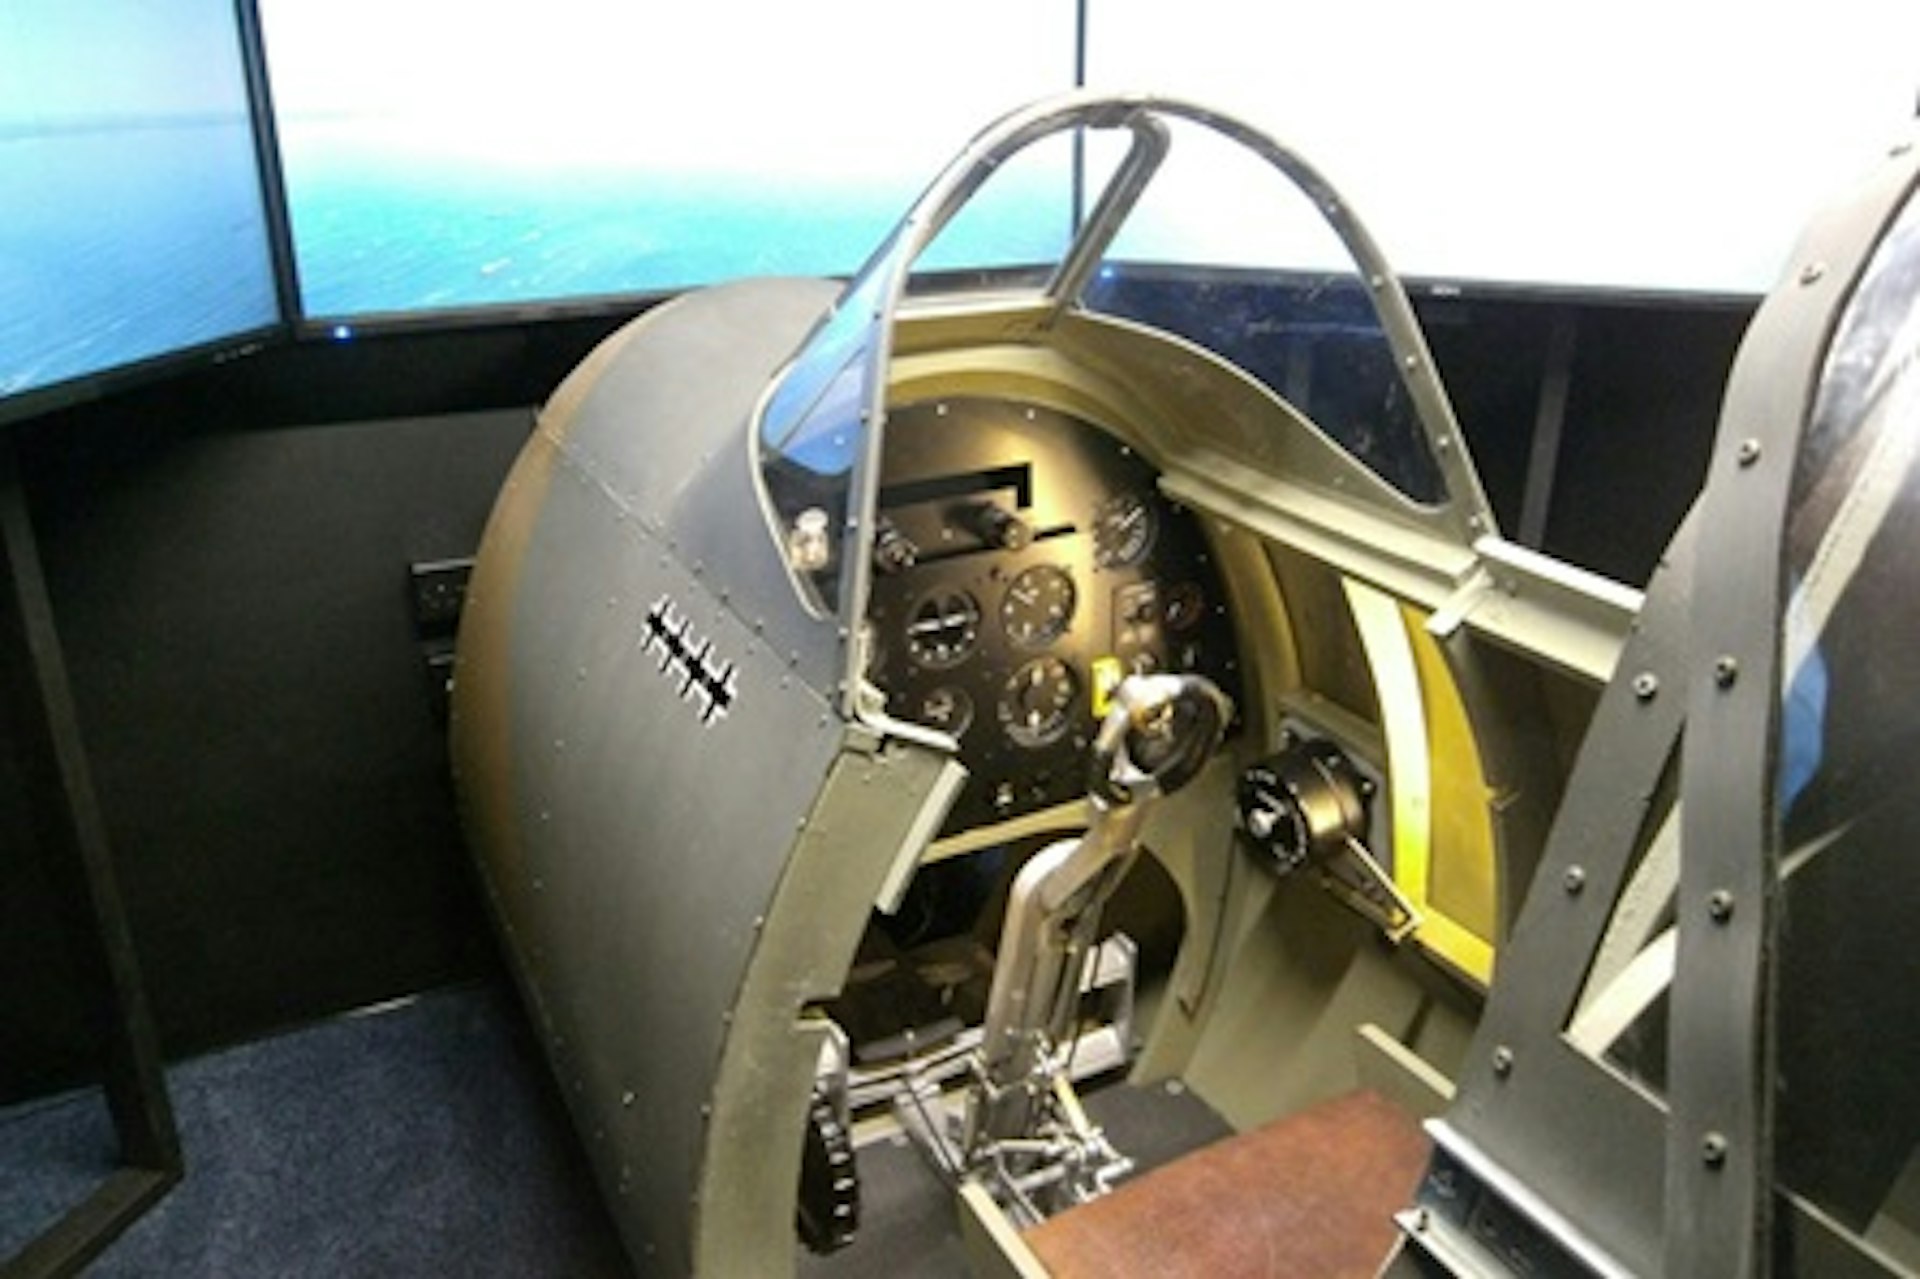 60 minute Battle of Britain Dogfight Simulator for Two 2